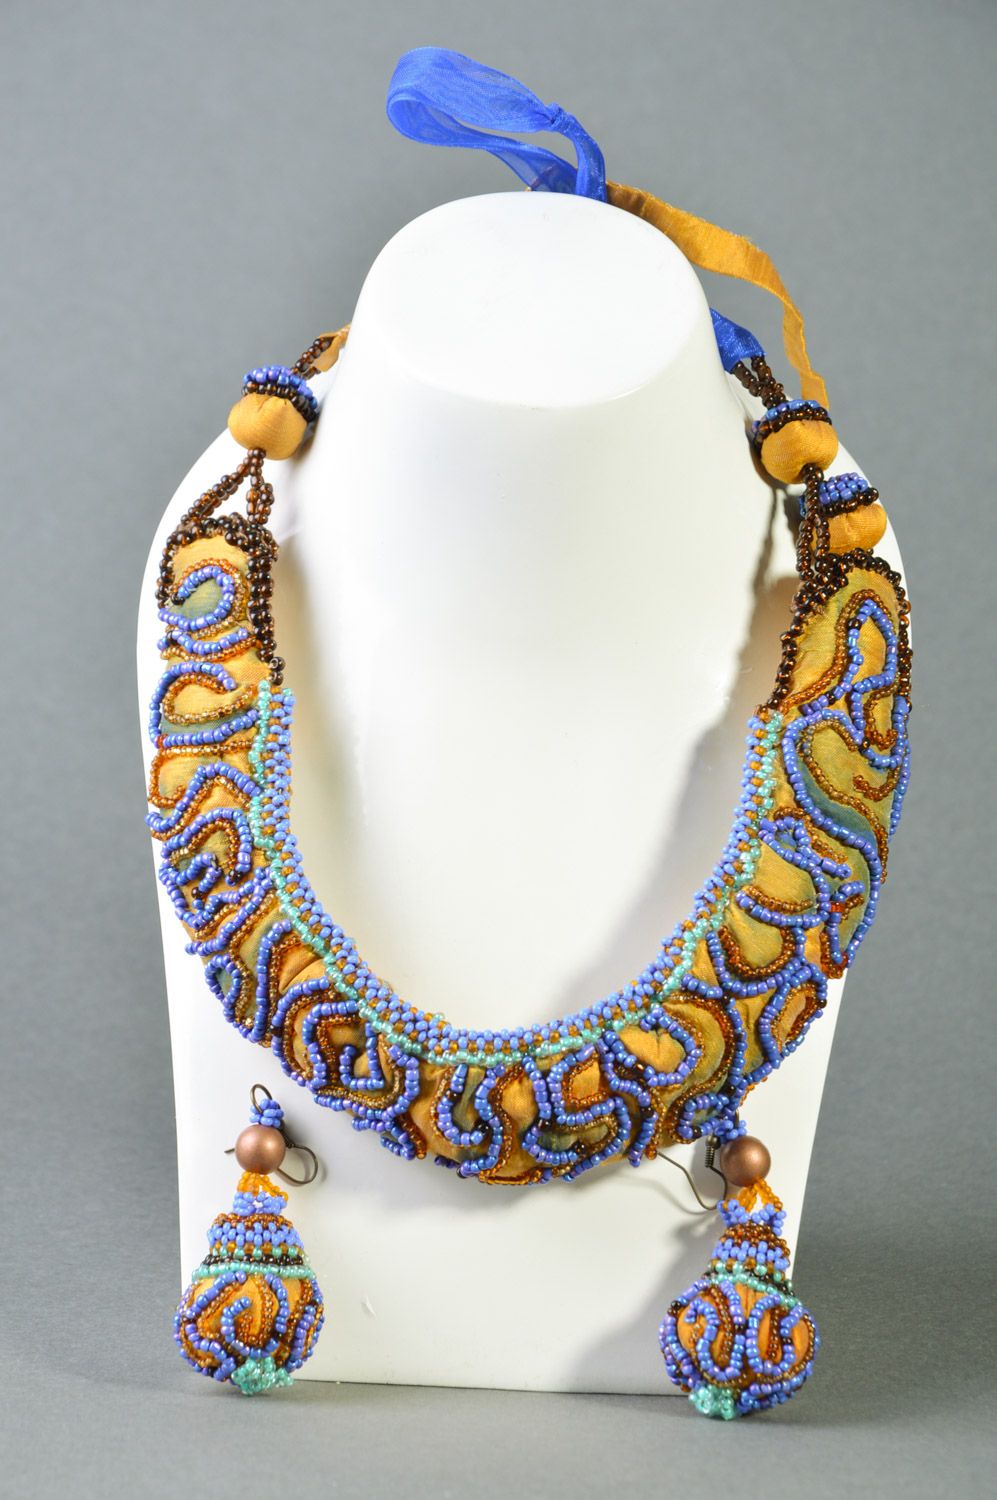 Beautiful handmade women's jewelry set 2 items earrings and necklace woven of beads and fabric photo 3